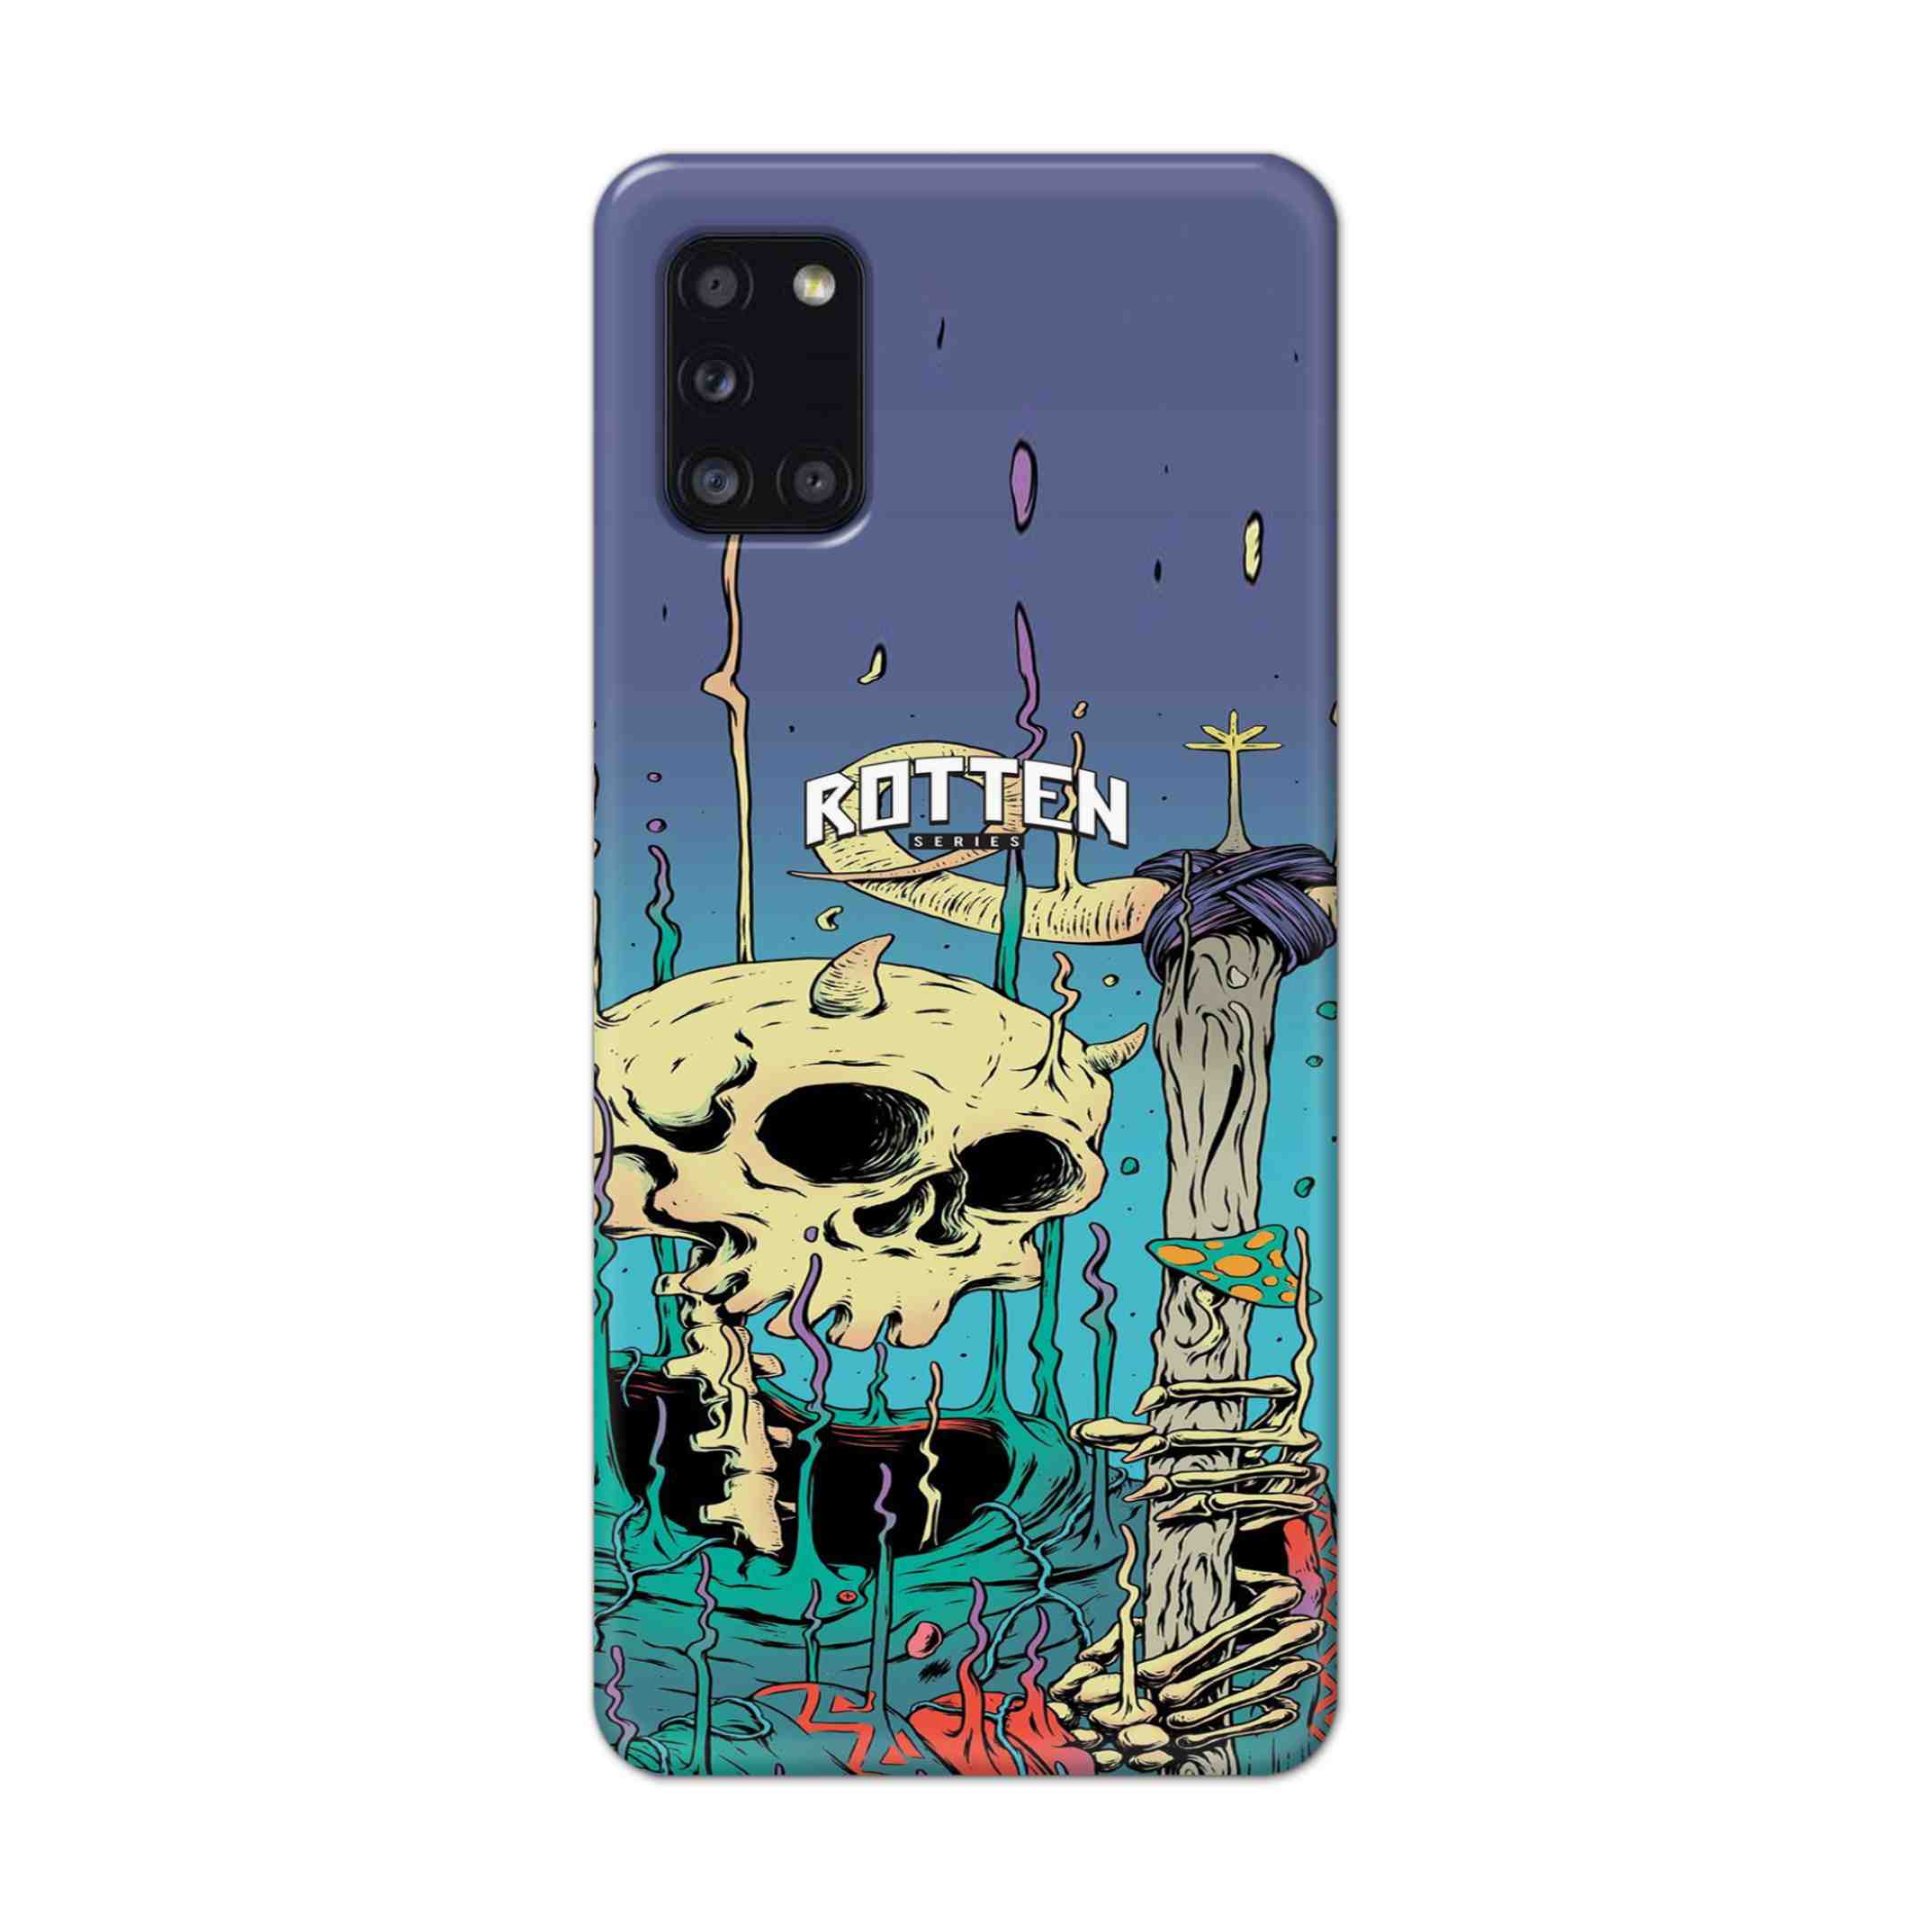 Buy Skull Hard Back Mobile Phone Case Cover For Samsung Galaxy A31 Online